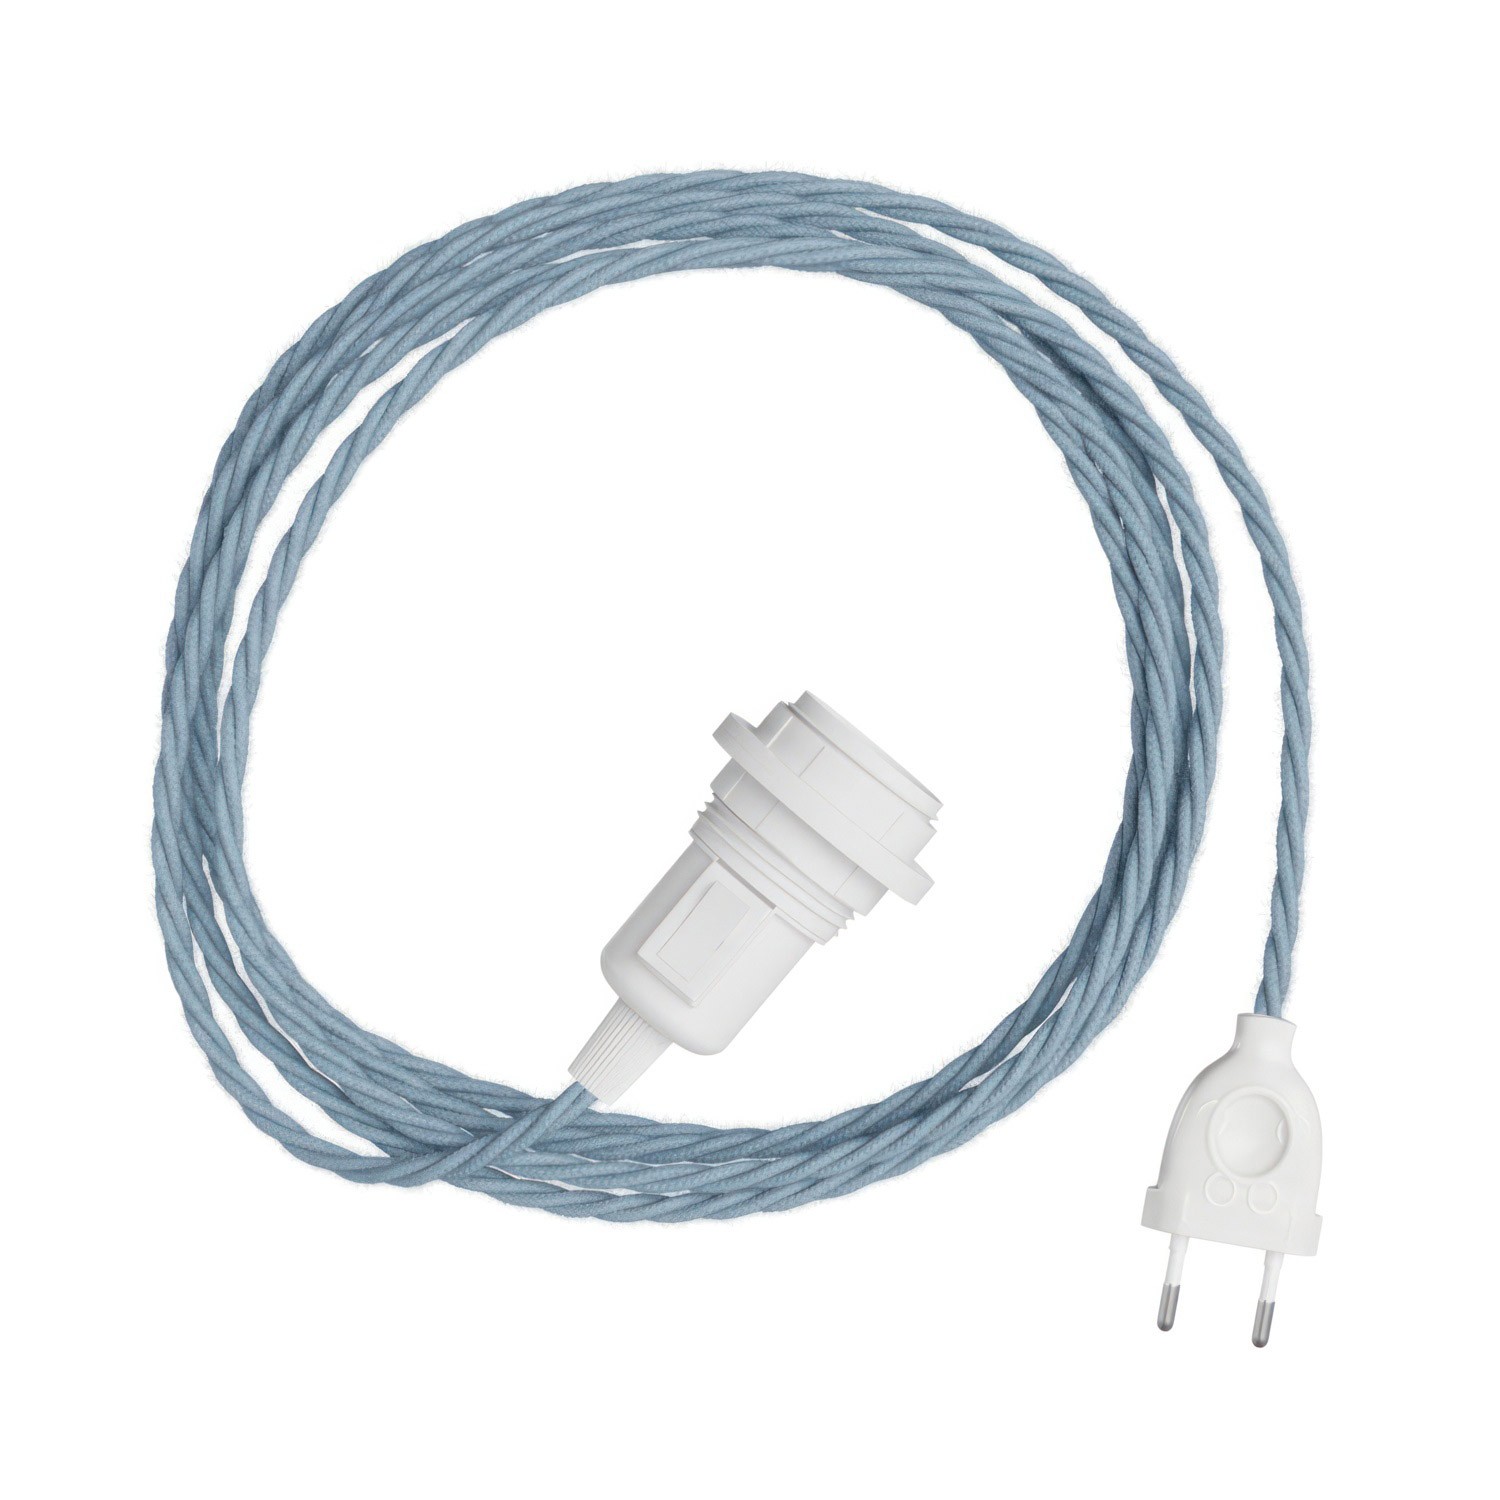 Snake Twisted for lampshade - Plug-in lamp with twisted textile cable and 2 pole plug